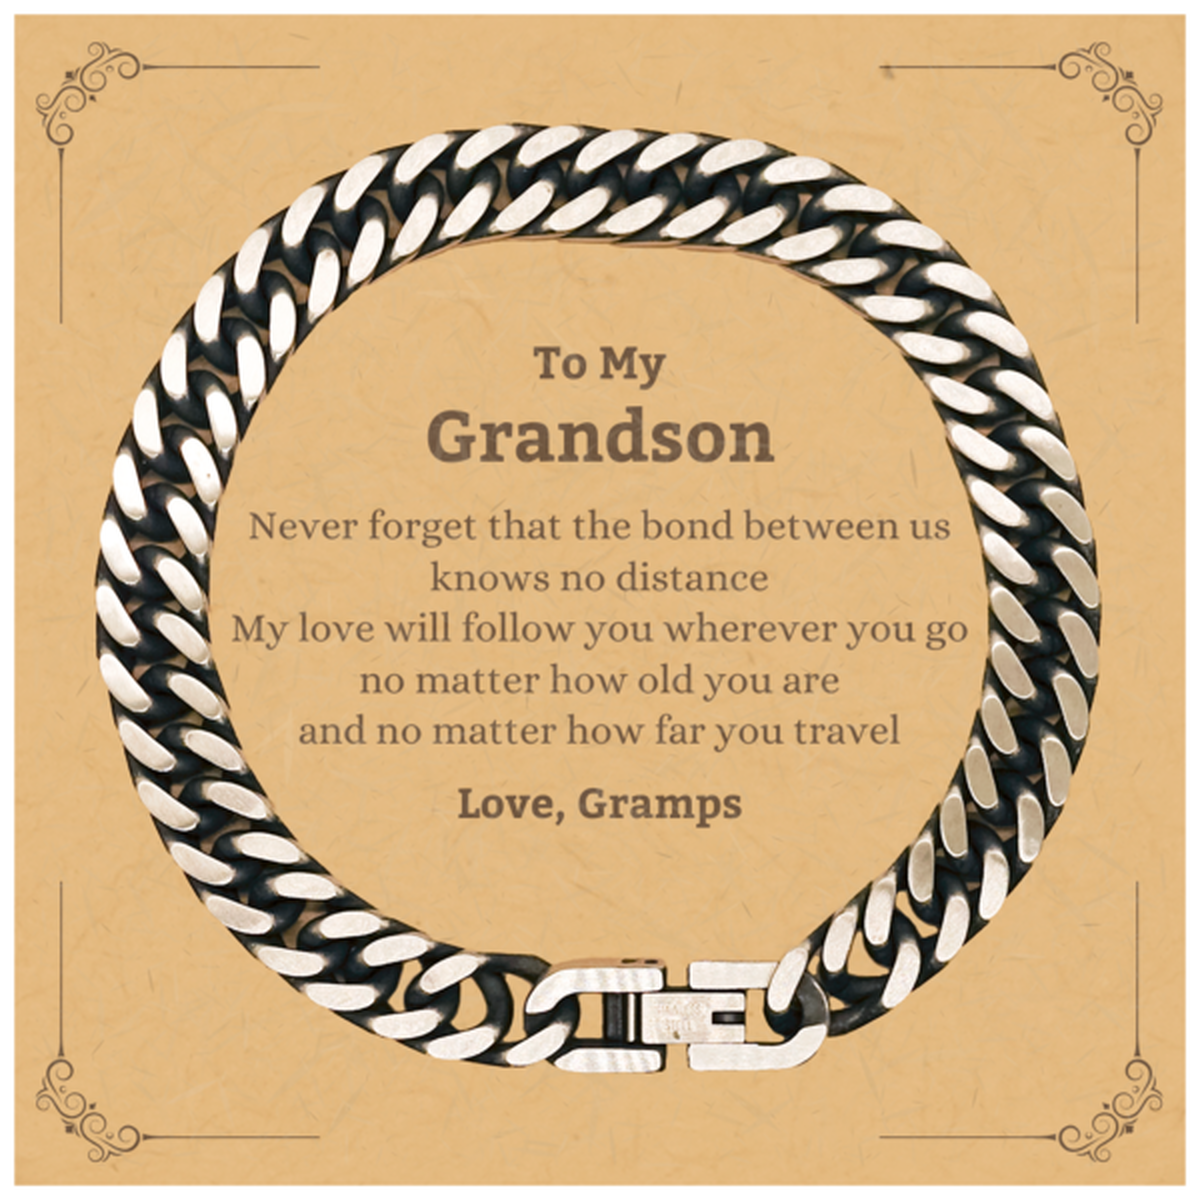 Grandson Birthday Gifts from Gramps, Adjustable Cuban Link Chain Bracelet for Grandson Christmas Graduation Unique Gifts Grandson Never forget that the bond between us knows no distance. Love, Gramps